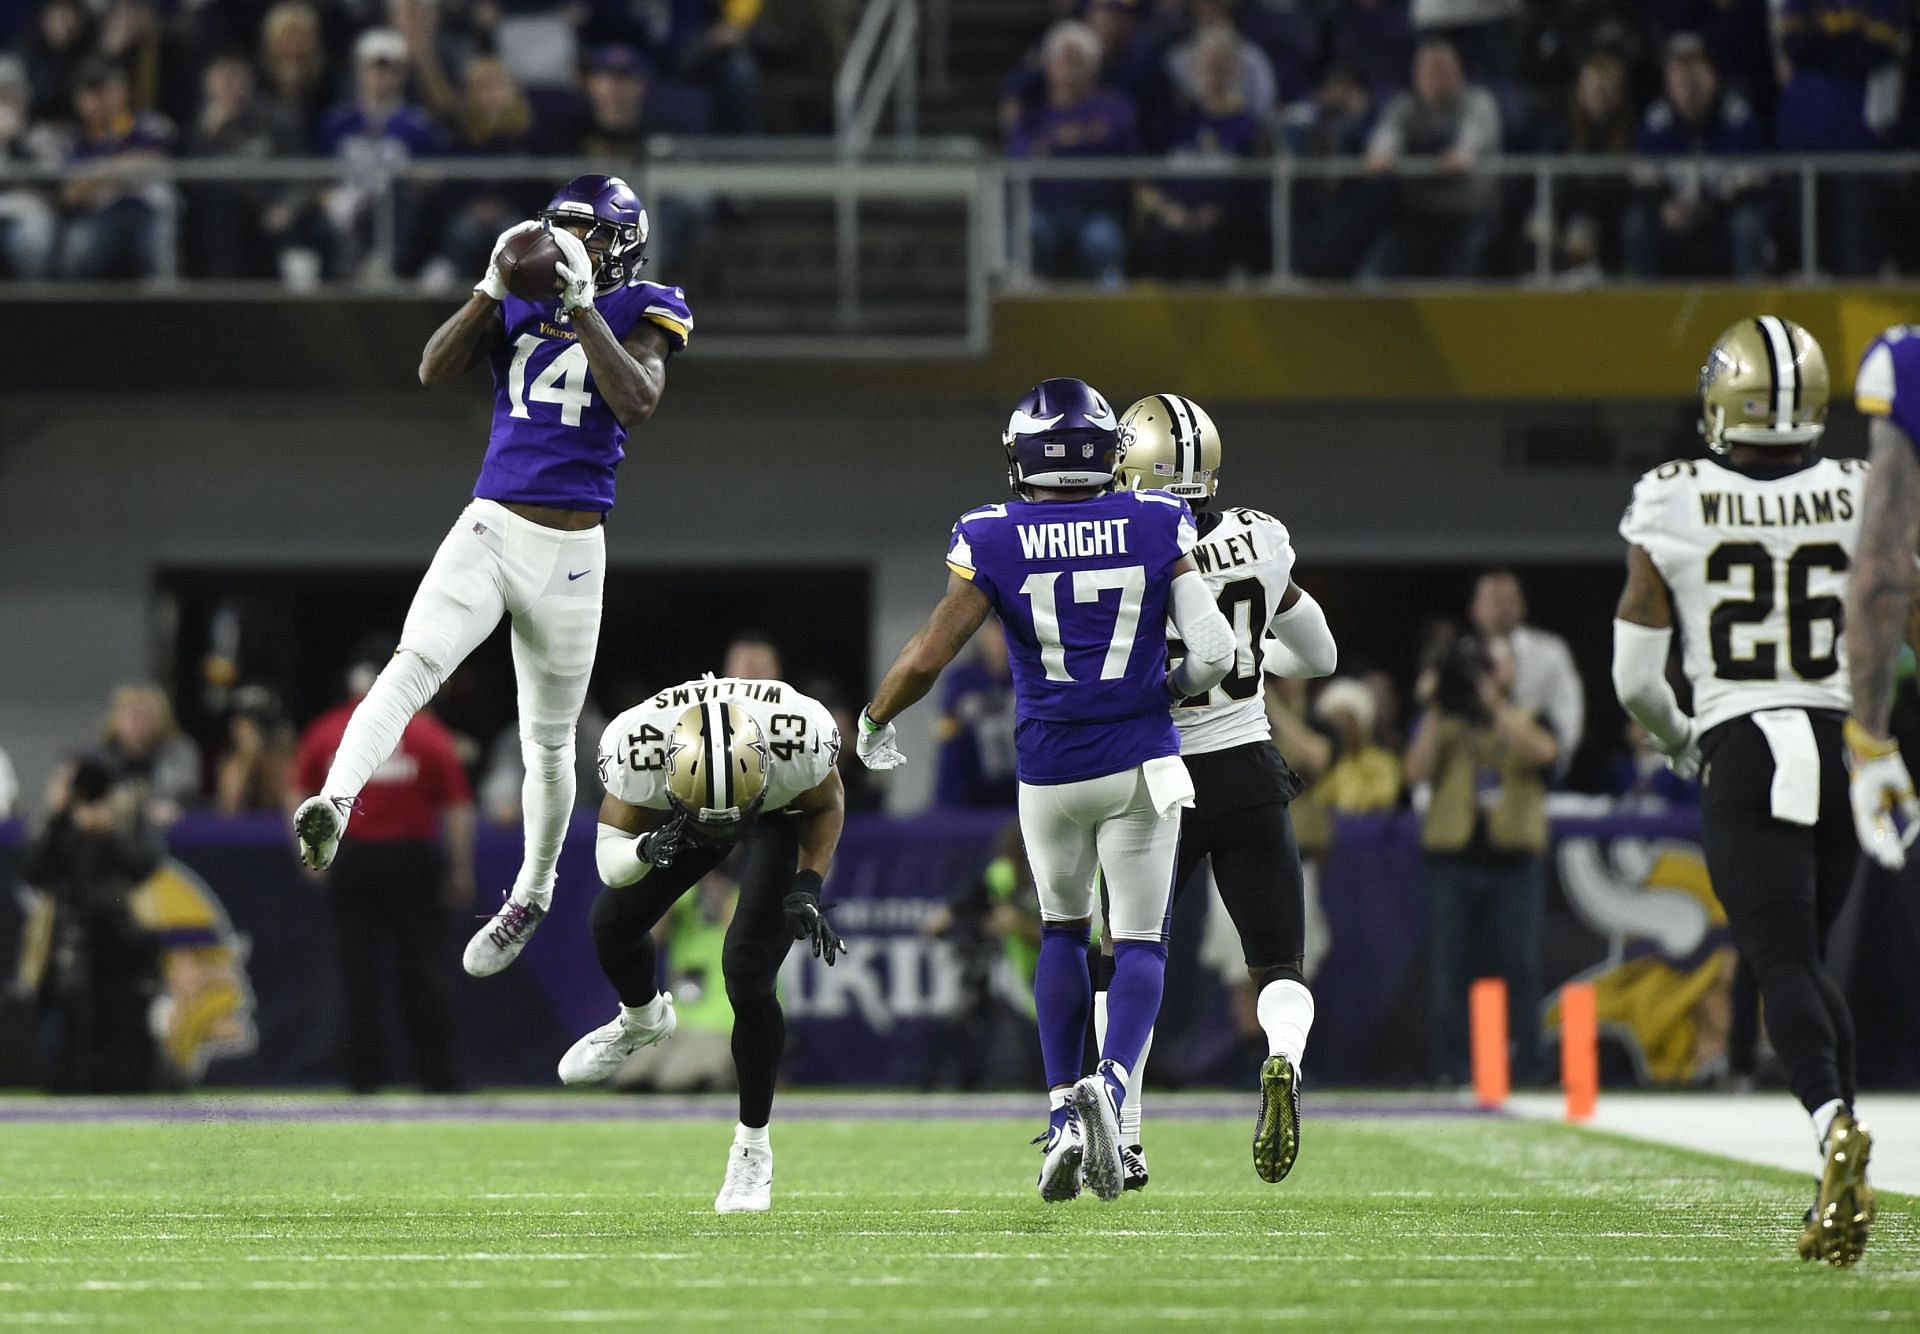 Minnesota Vikings wide receiver Stefon Diggs makes a miraculous play